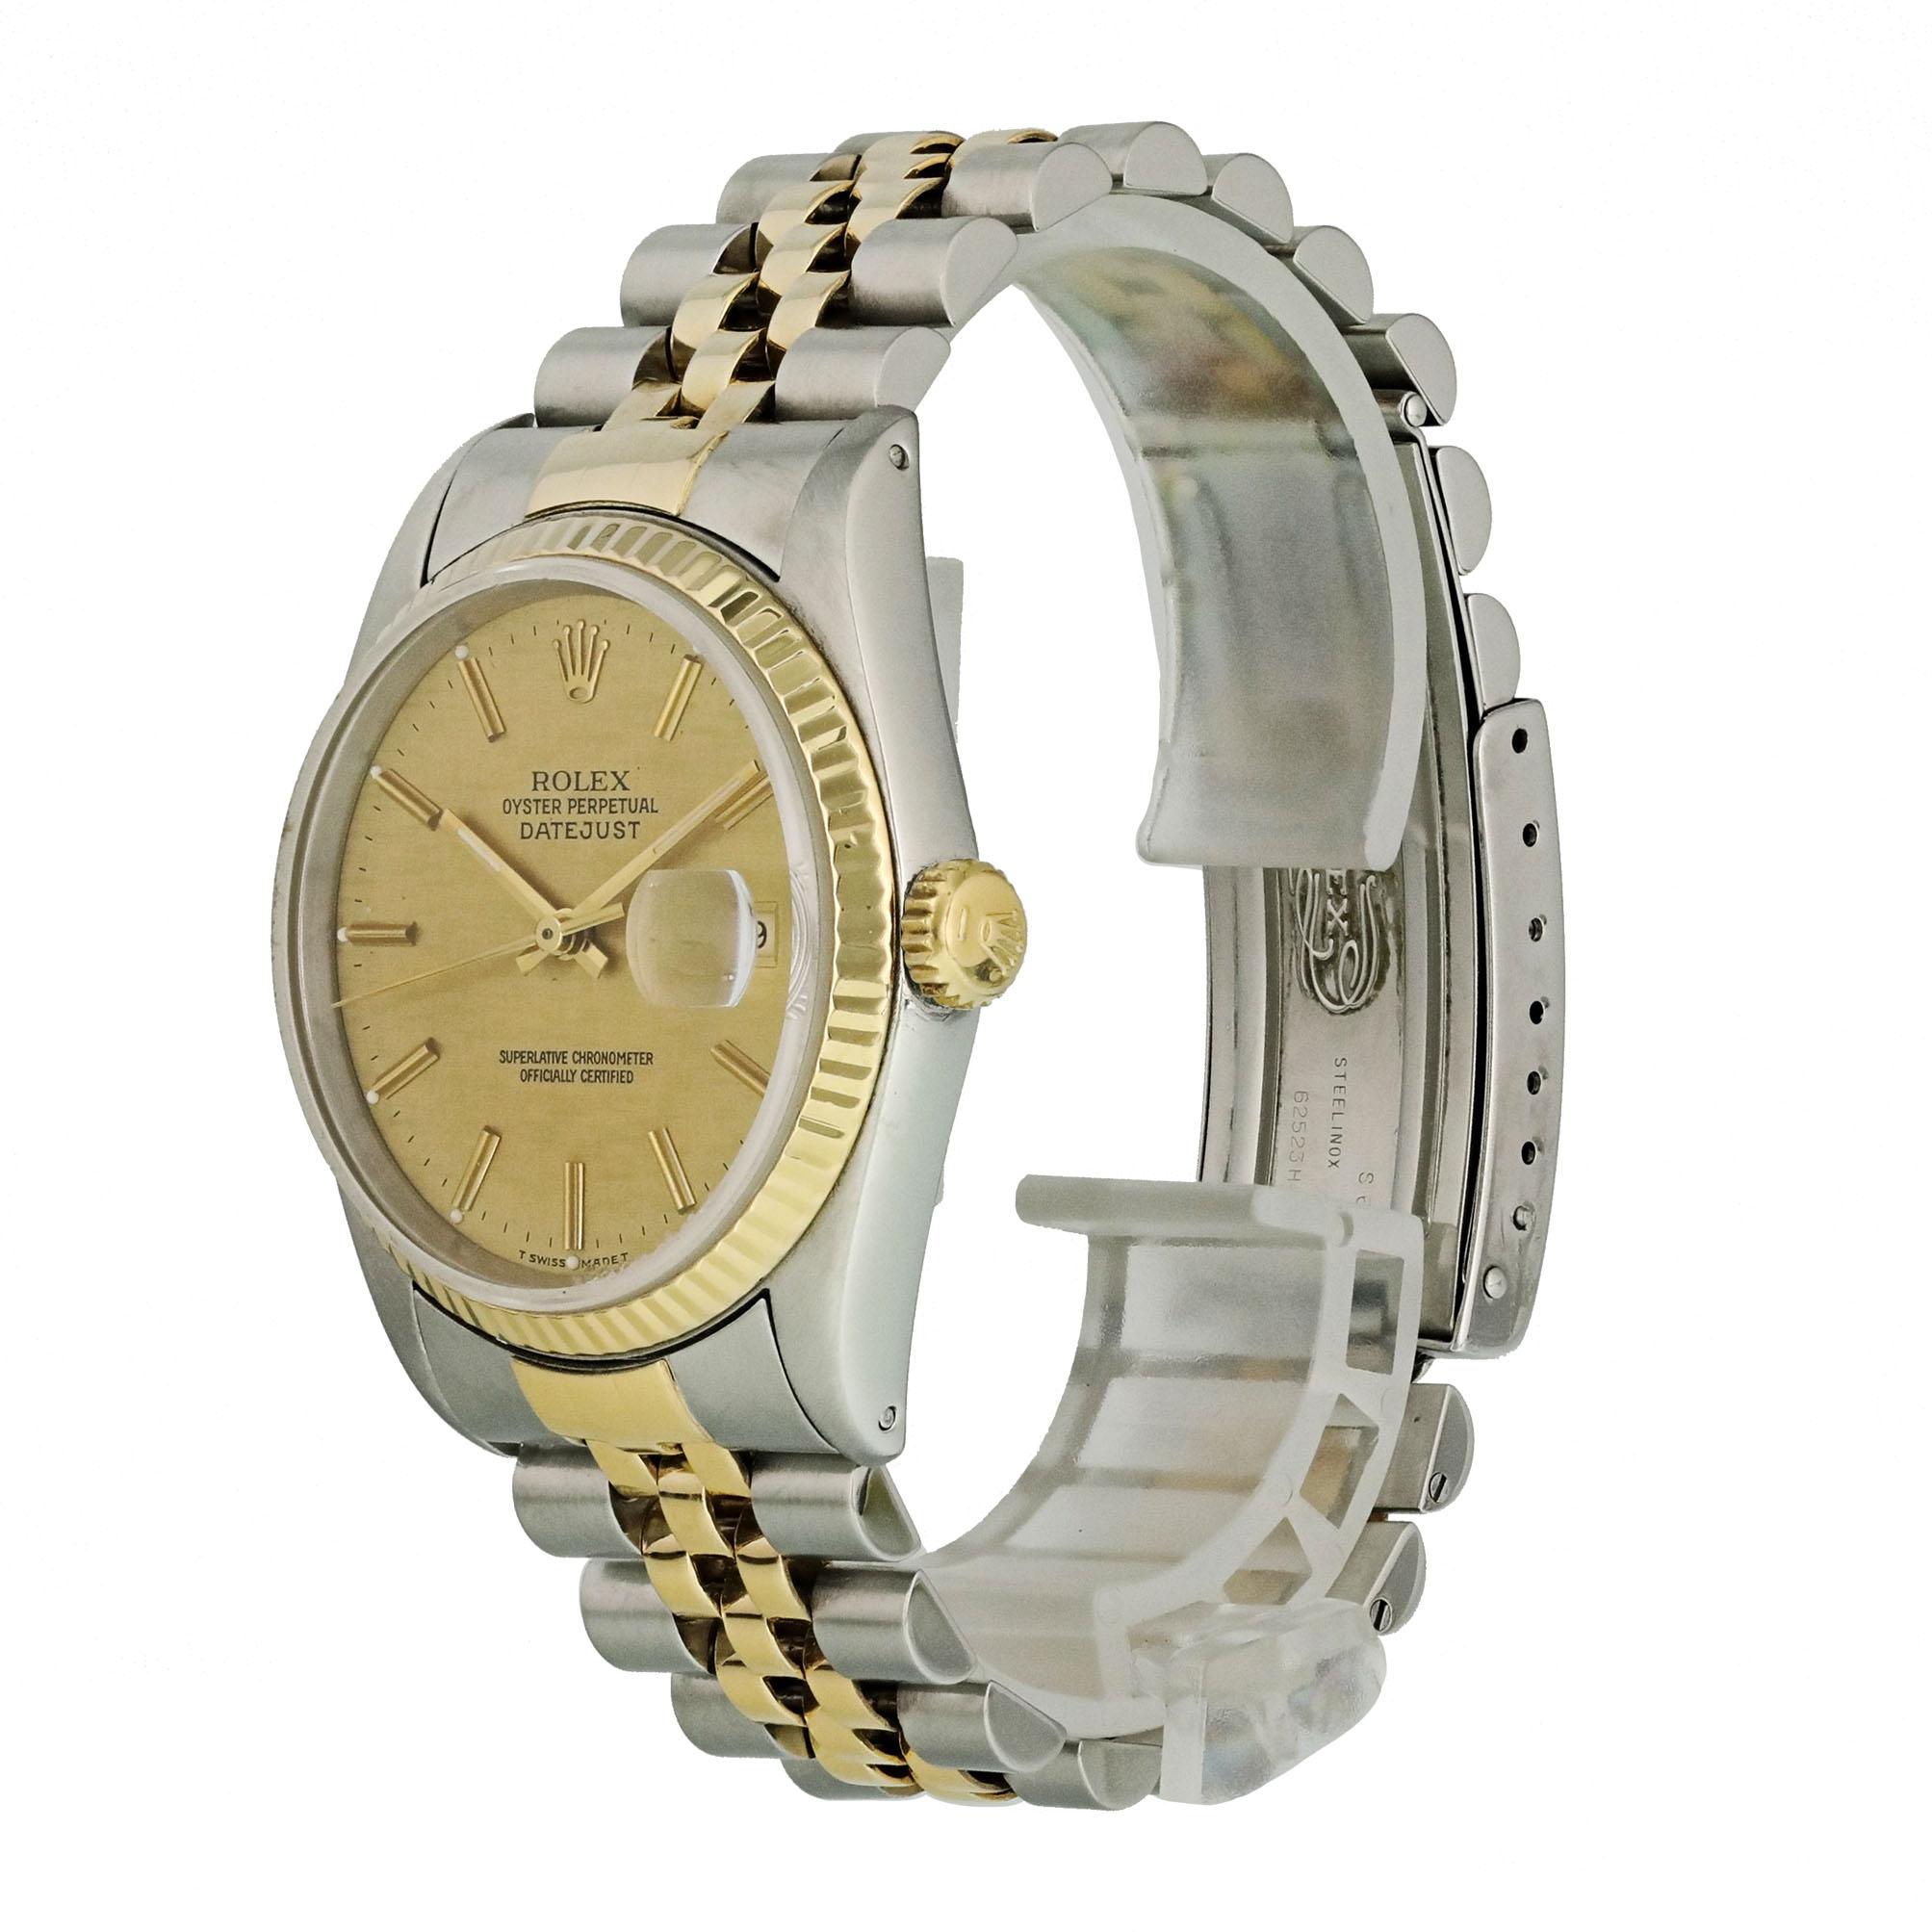 Rolex Datejust 16233 Linen Dial Mens Watch
36mm Stainless Steel case. 
Yellow Gold Fluted bezel. 
Champagne Linen dial with Luminous gold hands and index hour markers. 
Minute markers on the outer dial. 
Date display at the 3 o'clock position.